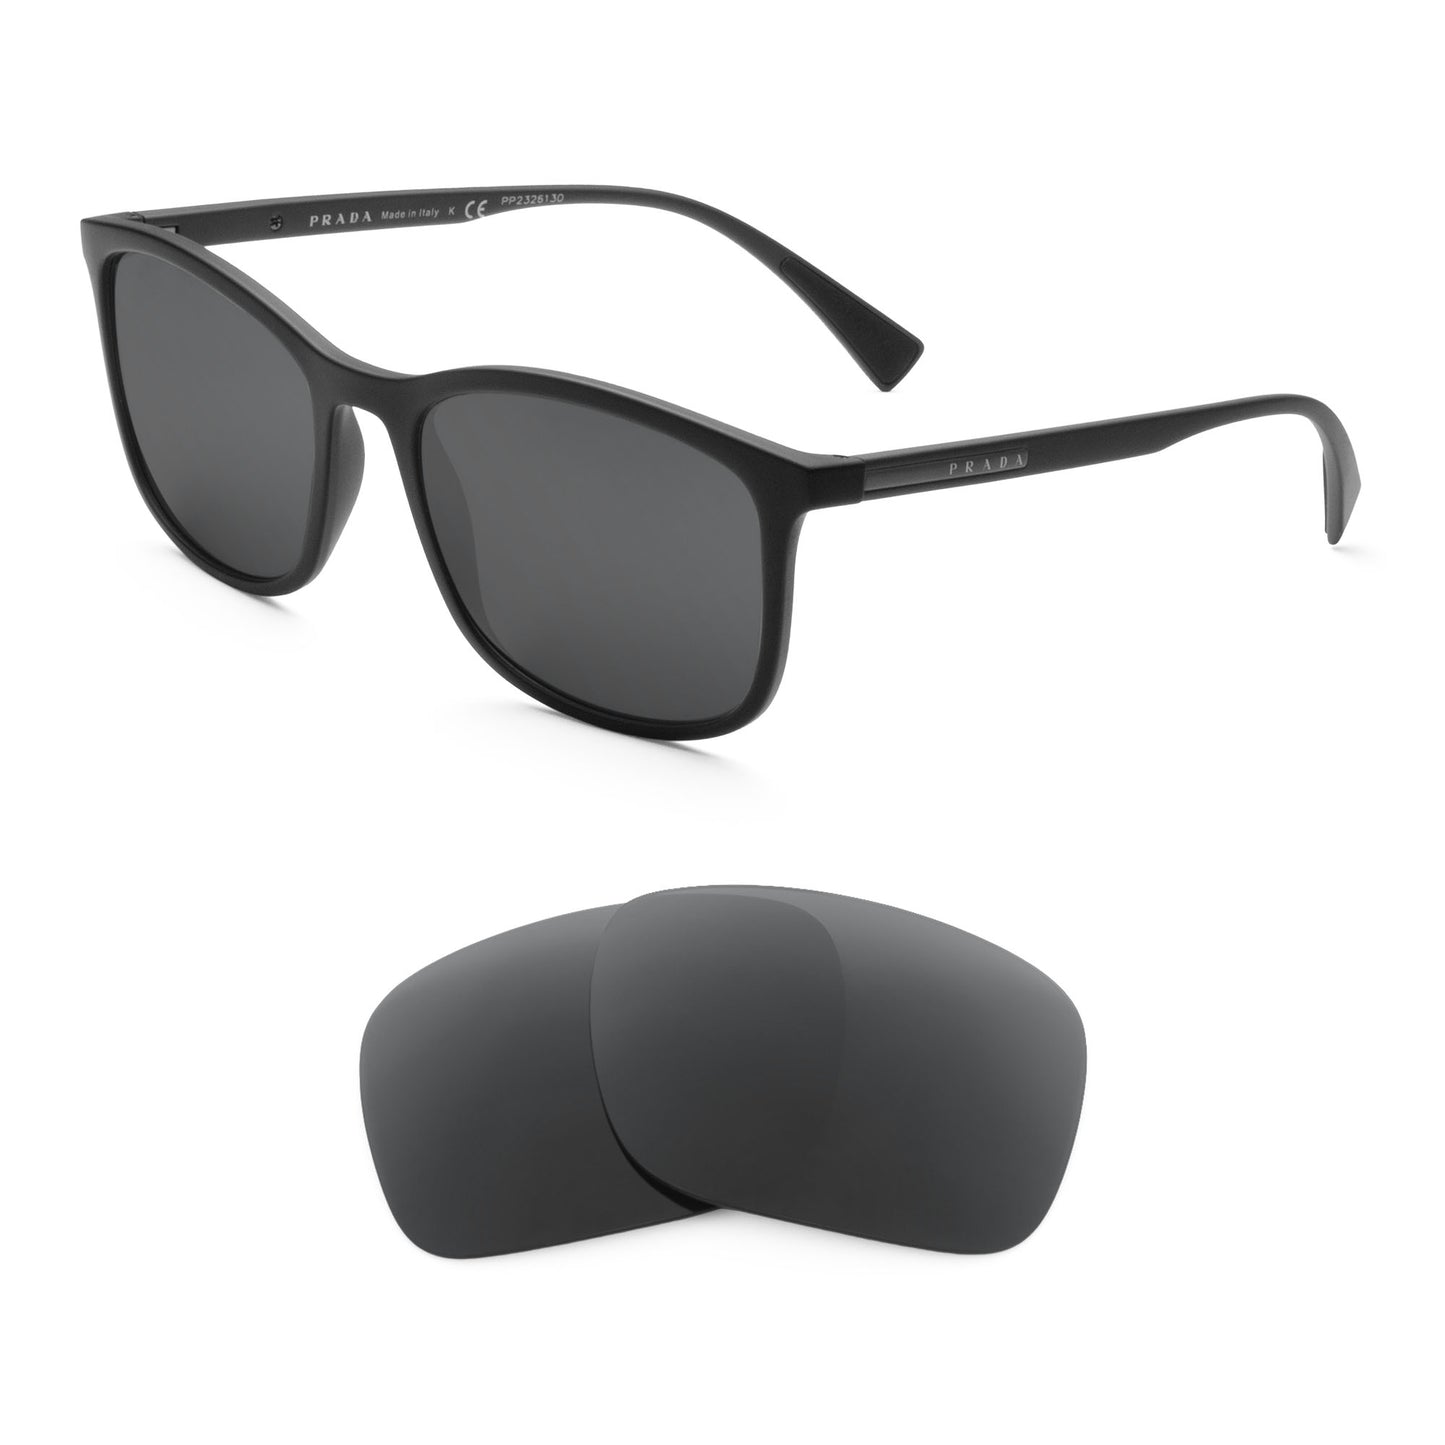 Prada PS 01TS sunglasses with replacement lenses